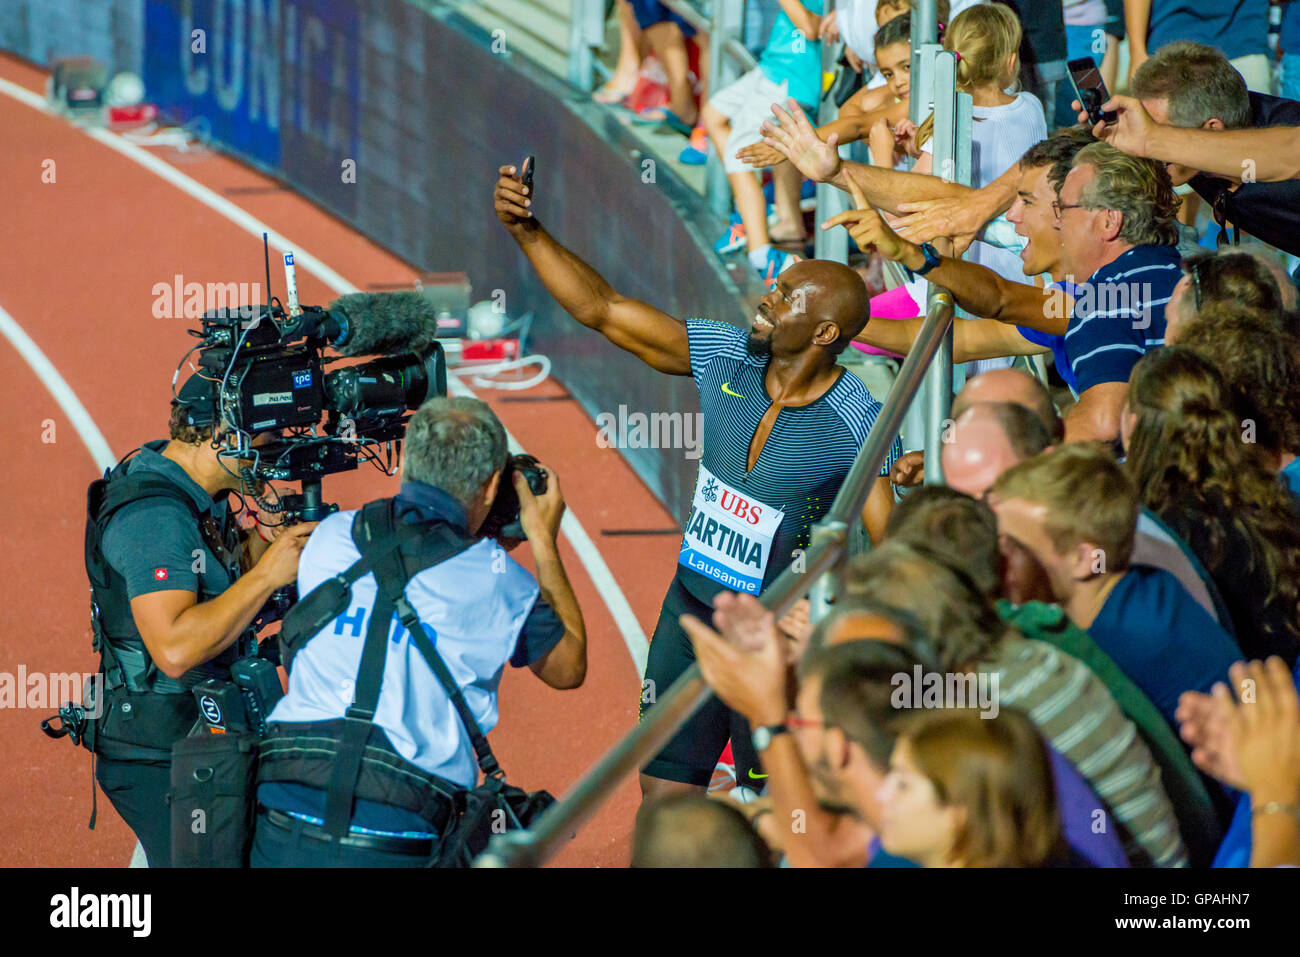 Churandy Martina (NED) gives away a selfie session after his 1st place in the Men's 200m Diamond Race Athlétissima Lausanne Stock Photo